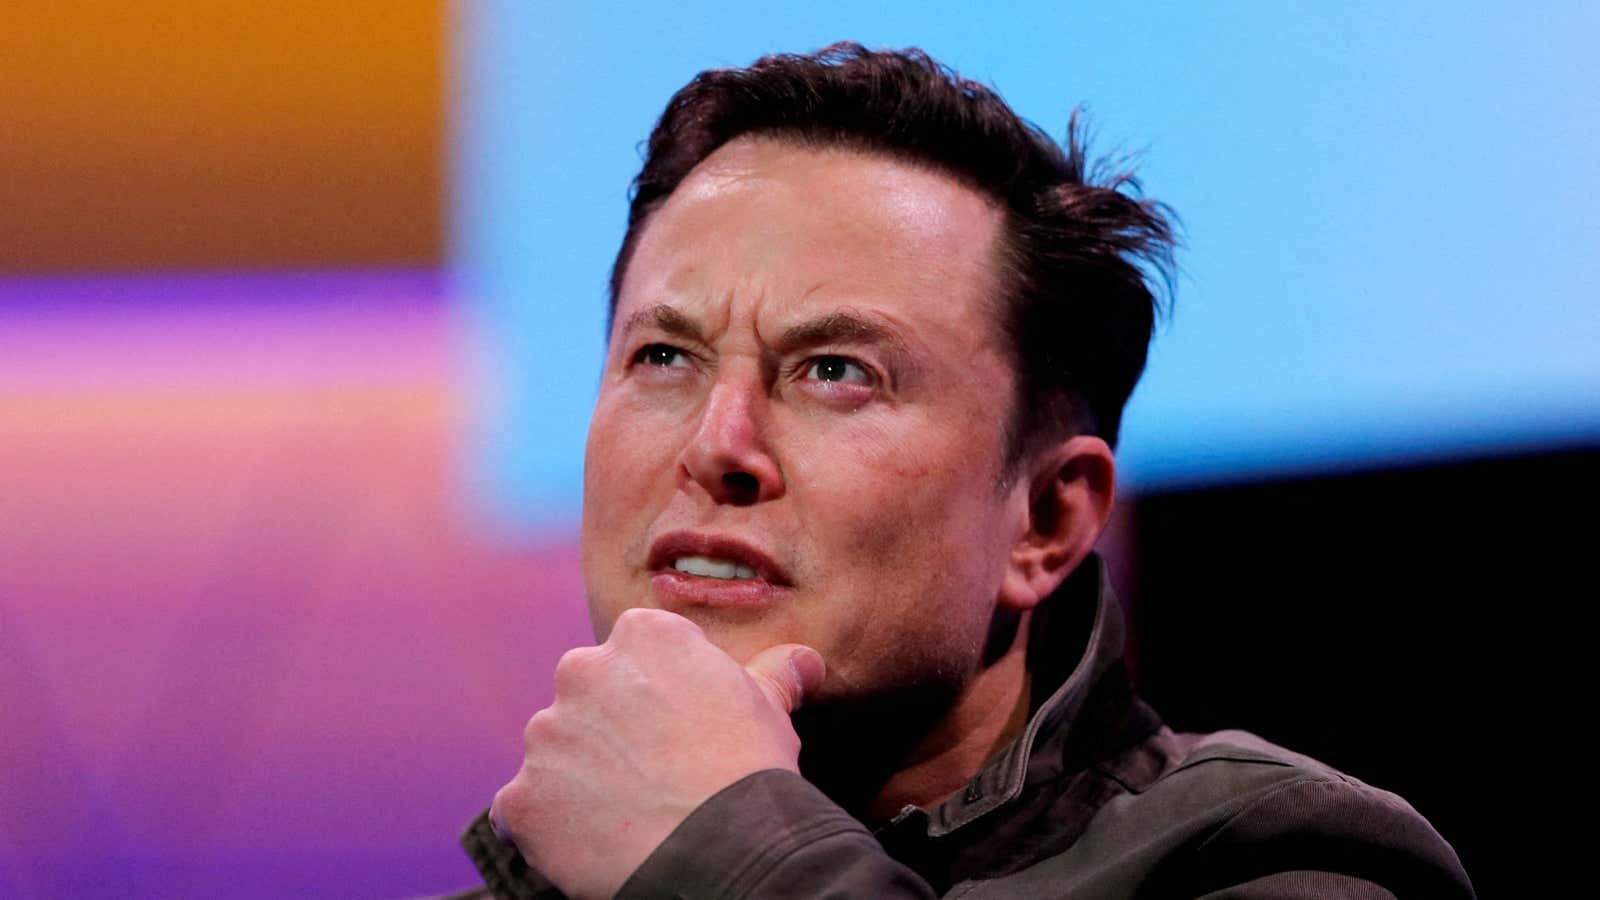 Tesla CEO Elon Musk has complained that ESG investing is a “scam.” The US SEC is cracking down on ESG greenwashing.